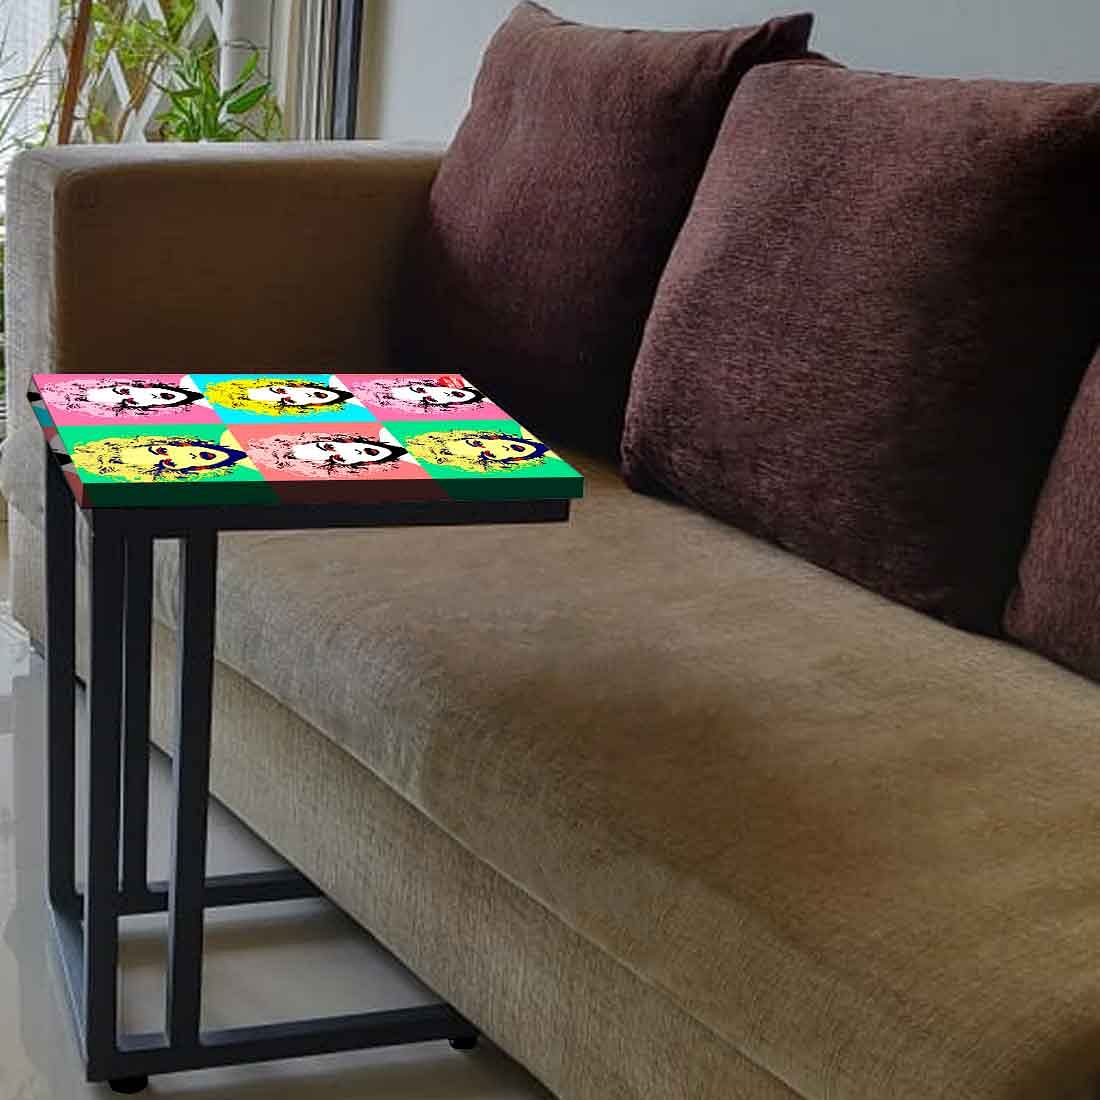 Best C Shaped Table For Sofa - Lady Face Nutcase